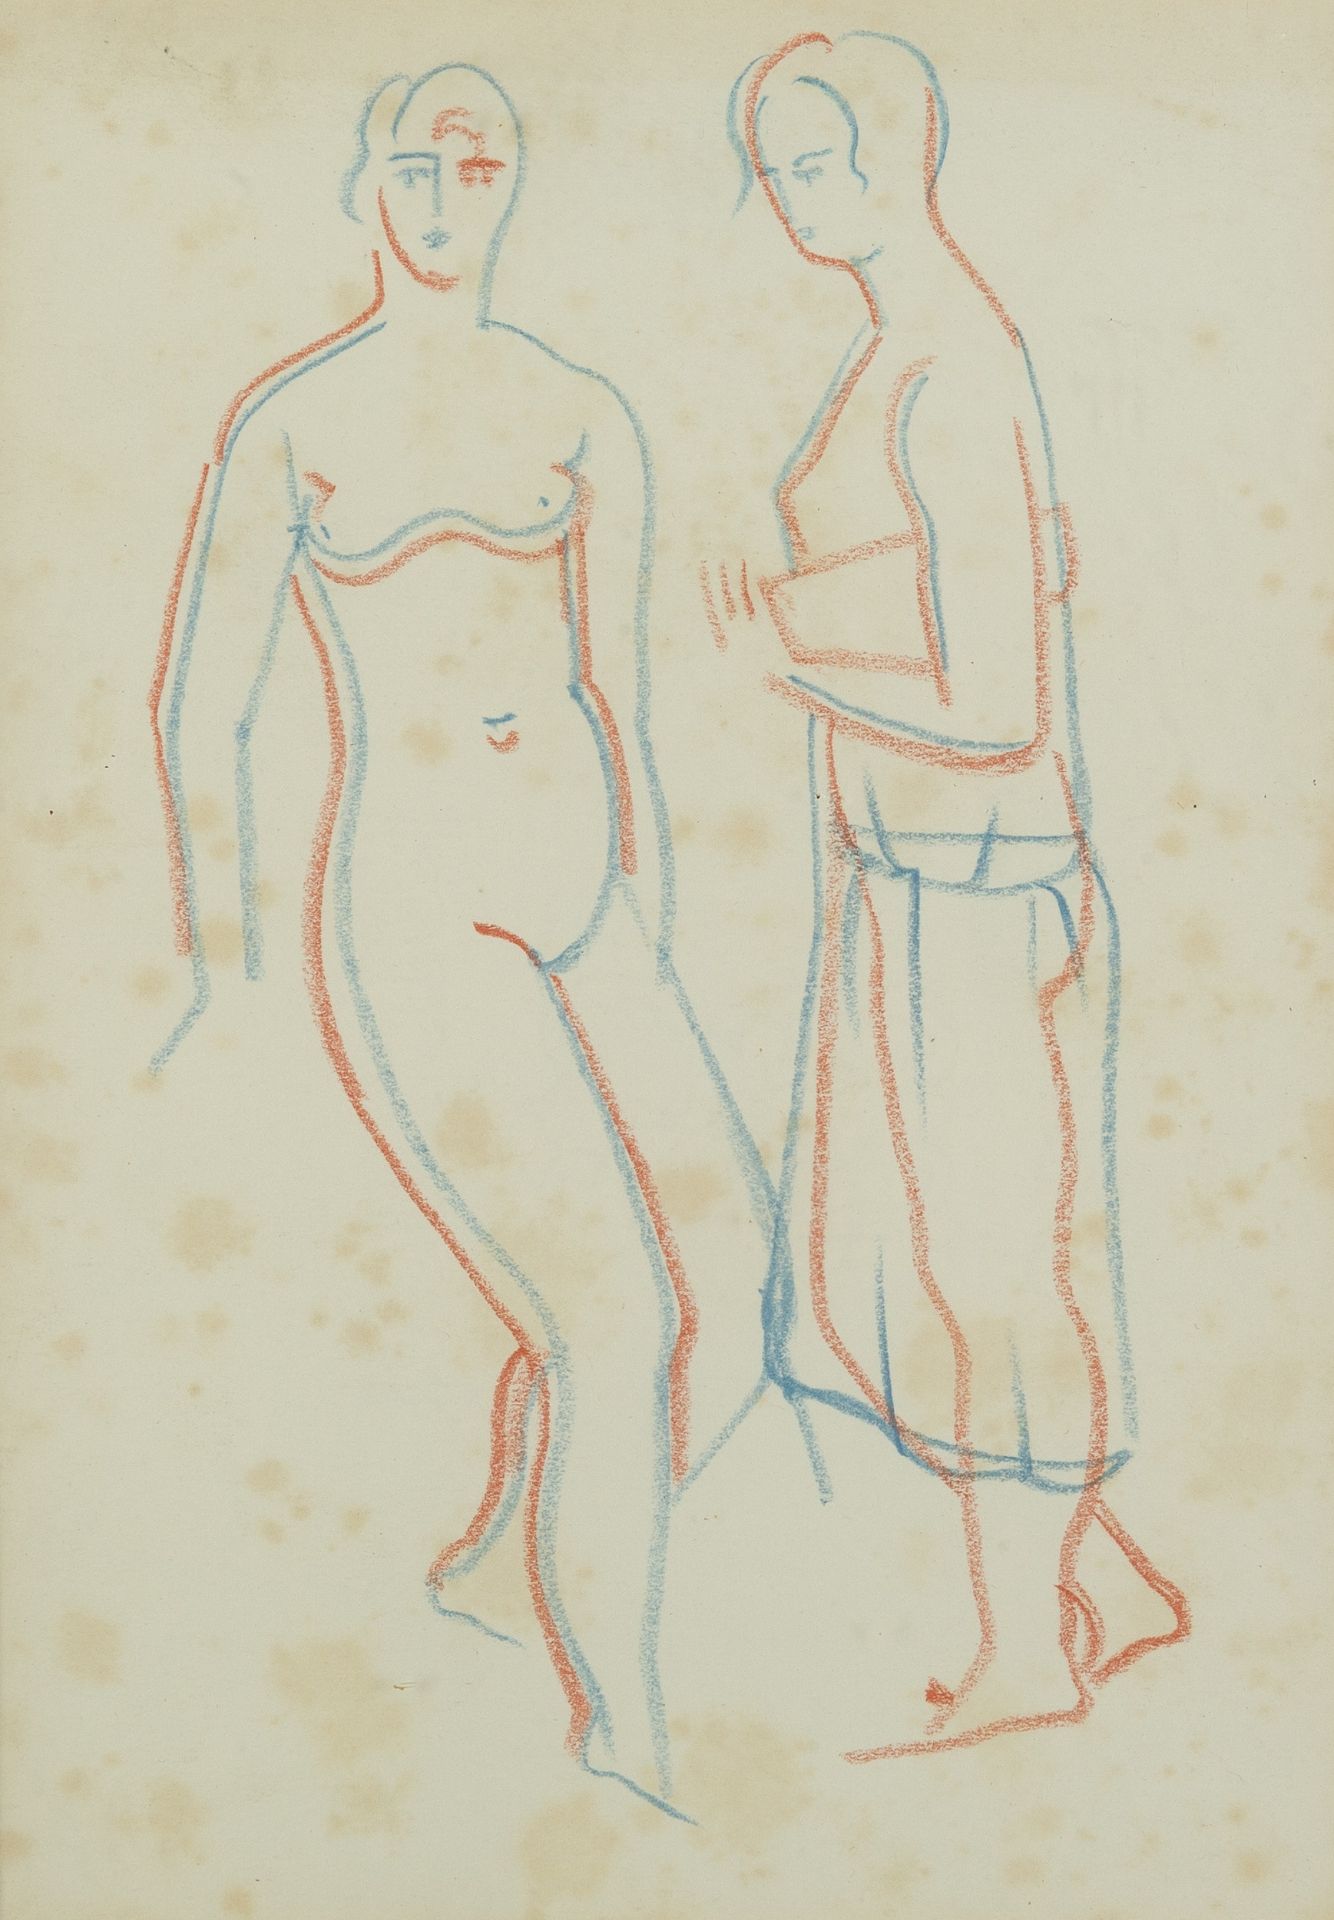 Christopher Wood (1901-1930) Nude & Woman in a Dress coloured crayon on paper 22 x 15cm. Provenance: